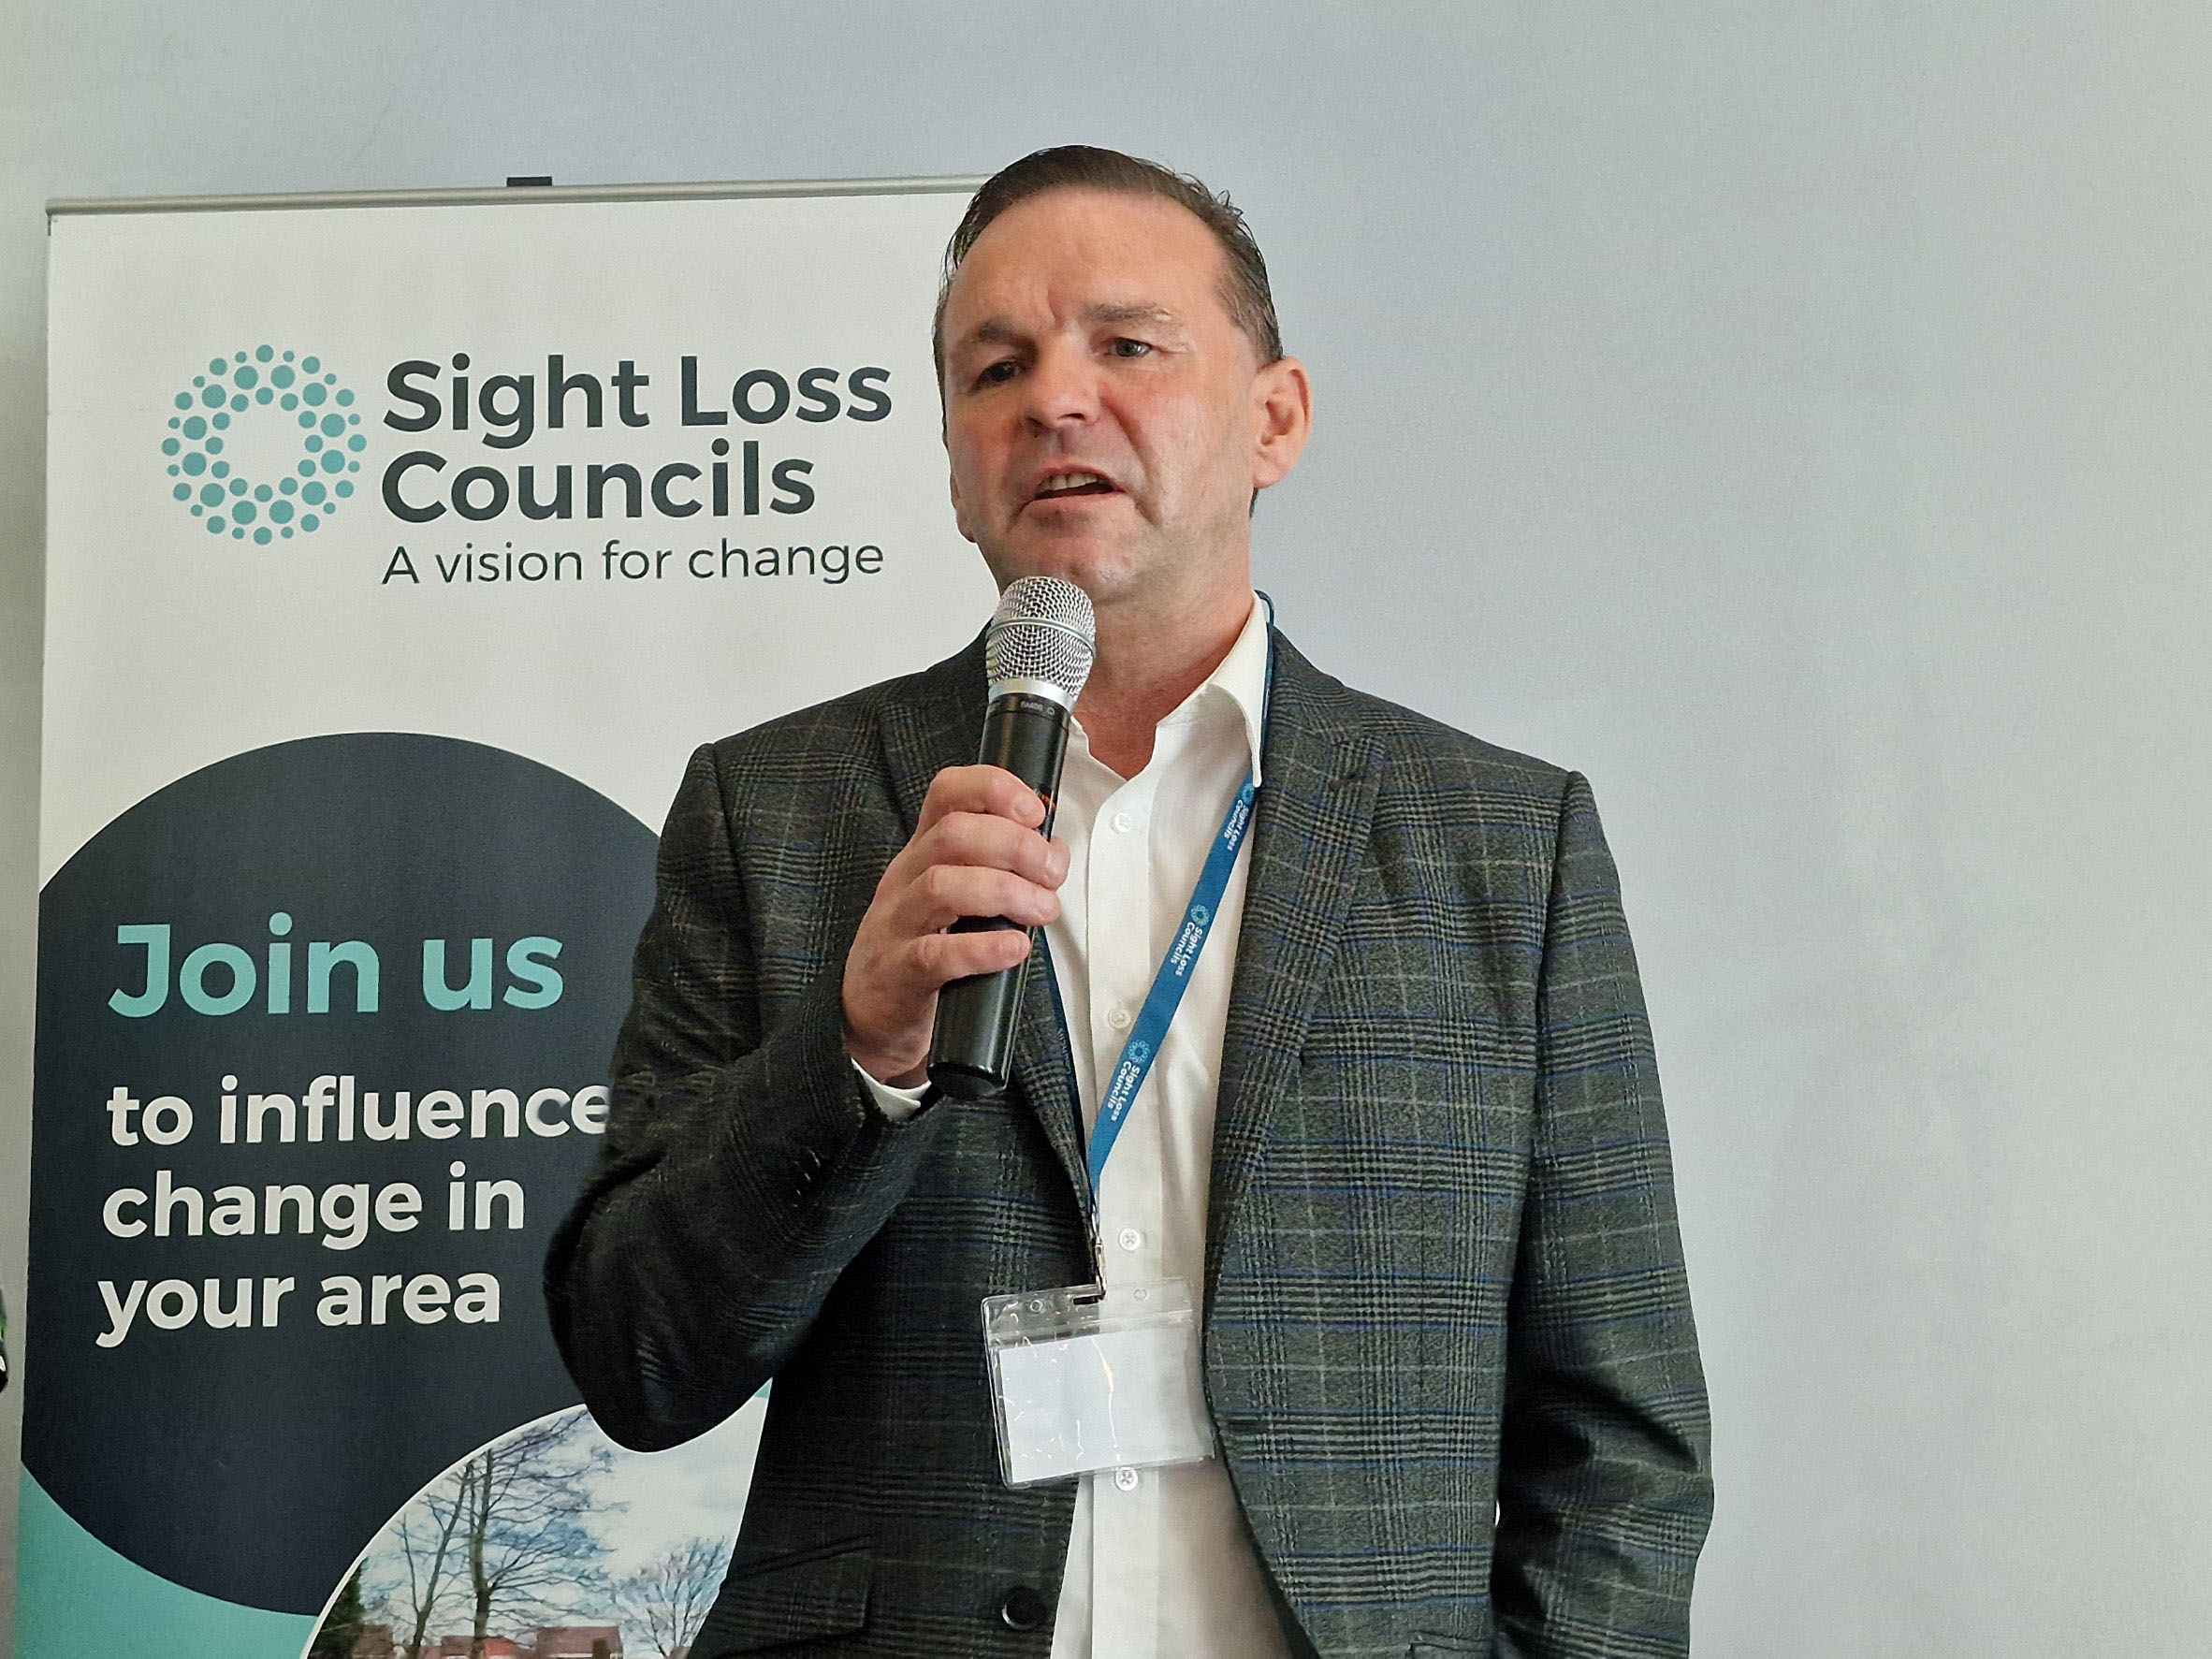 Image shows Sight Loss Council member Paul giving his talk about getting back into work after losing his sight. He is stood in front of a Sight Loss Council banner.